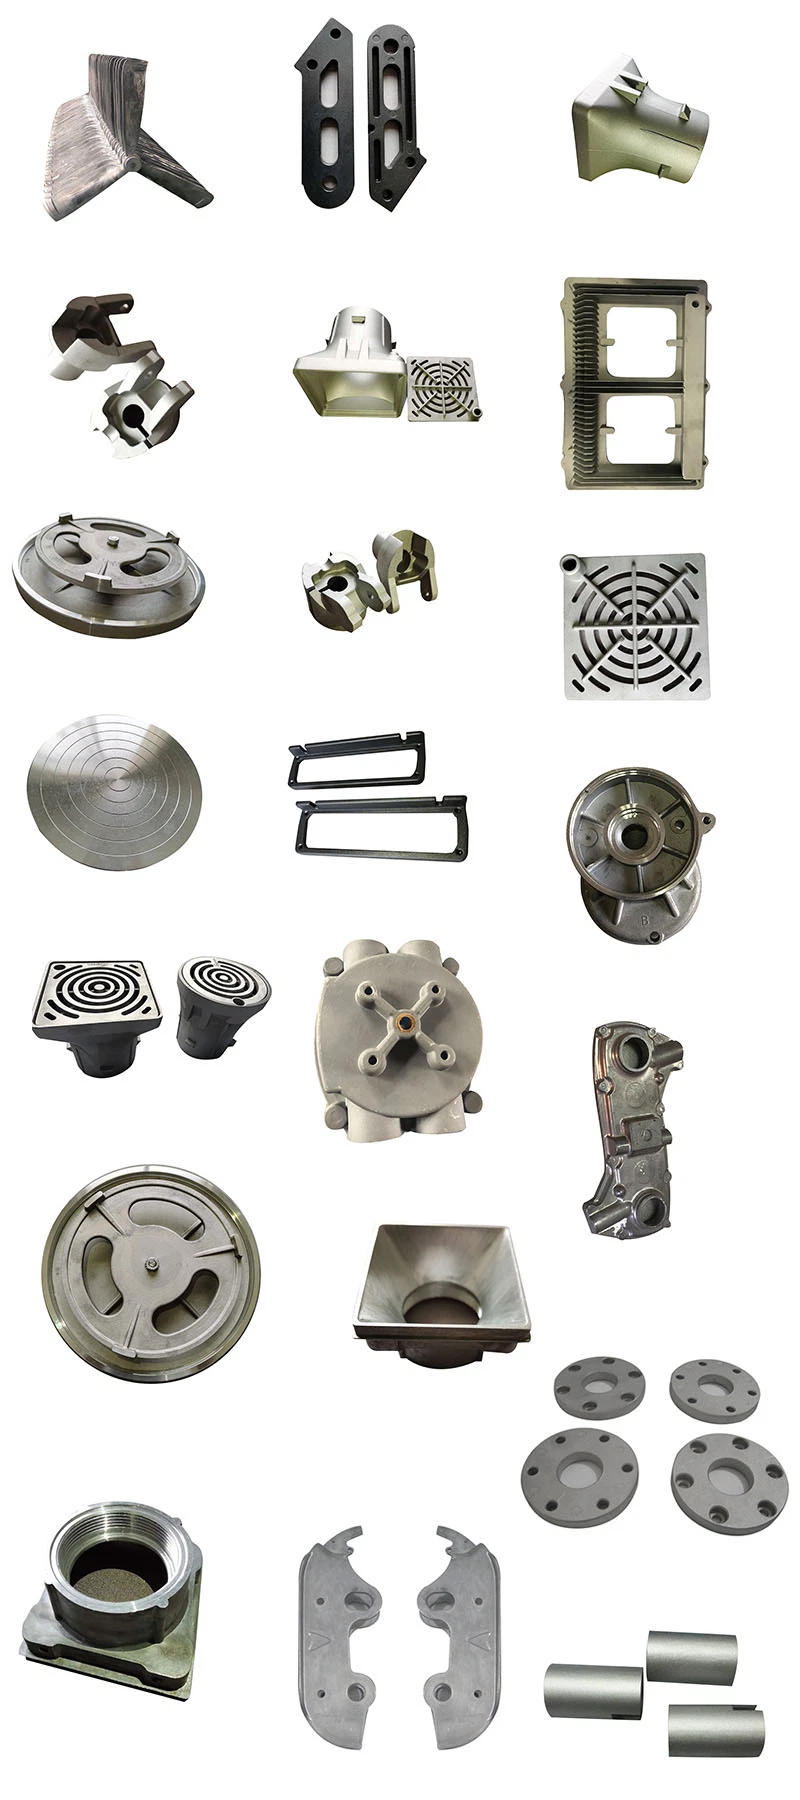 Aluminum/Copper/Zinc/Iron/Stainless Steel Casting Precision Parts Sand Die Casting Lost Wax Investment Casting